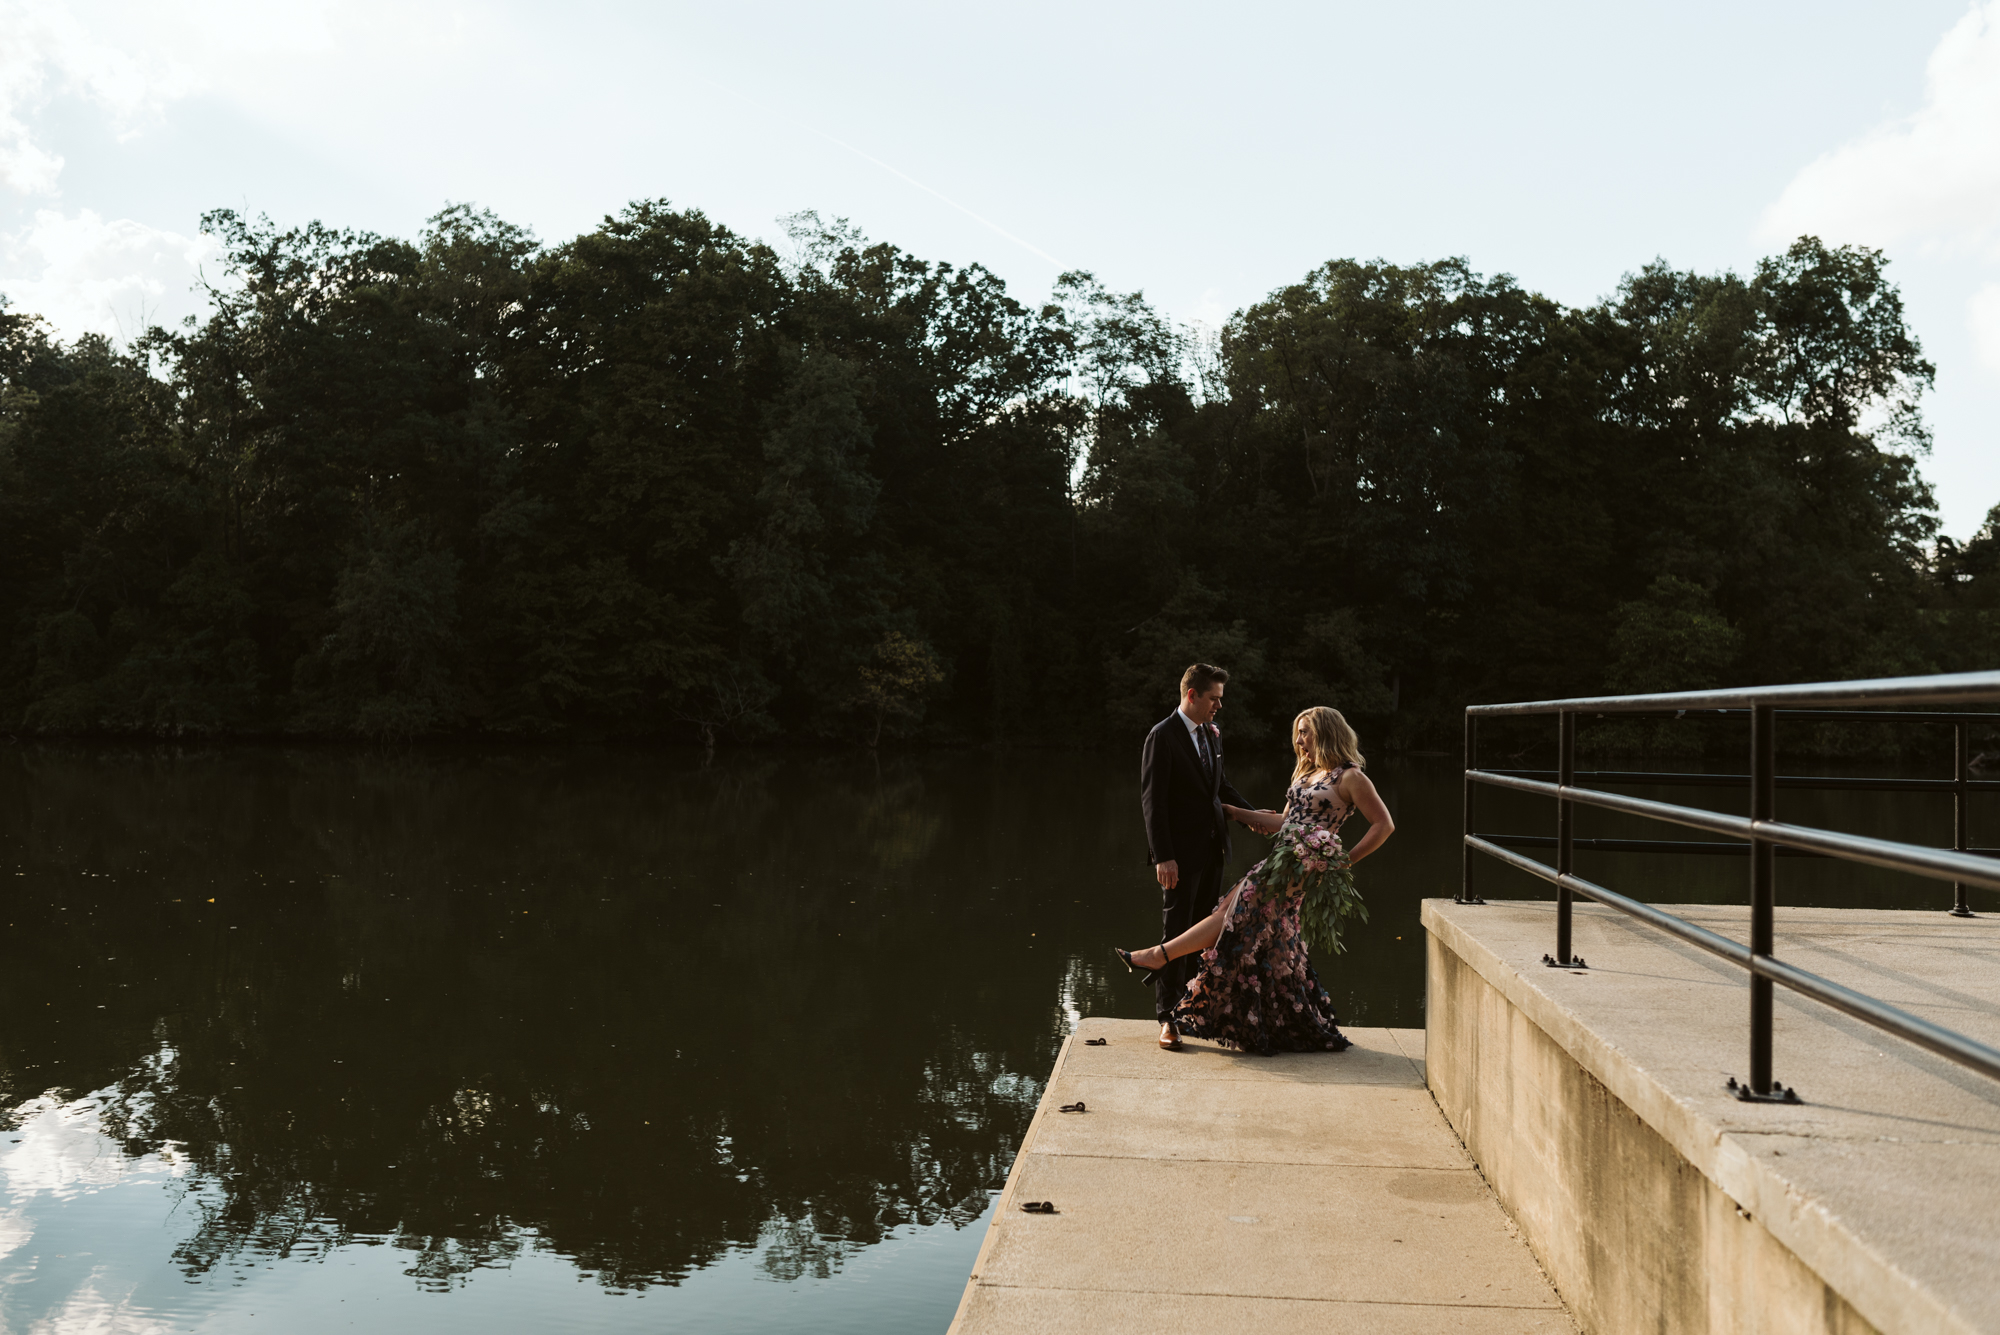 Pop-up Ceremony, Outdoor Wedding, Casual, Simple, Lake Roland, Baltimore, Maryland Wedding Photographer, Laid Back, Bride and Groom by Water